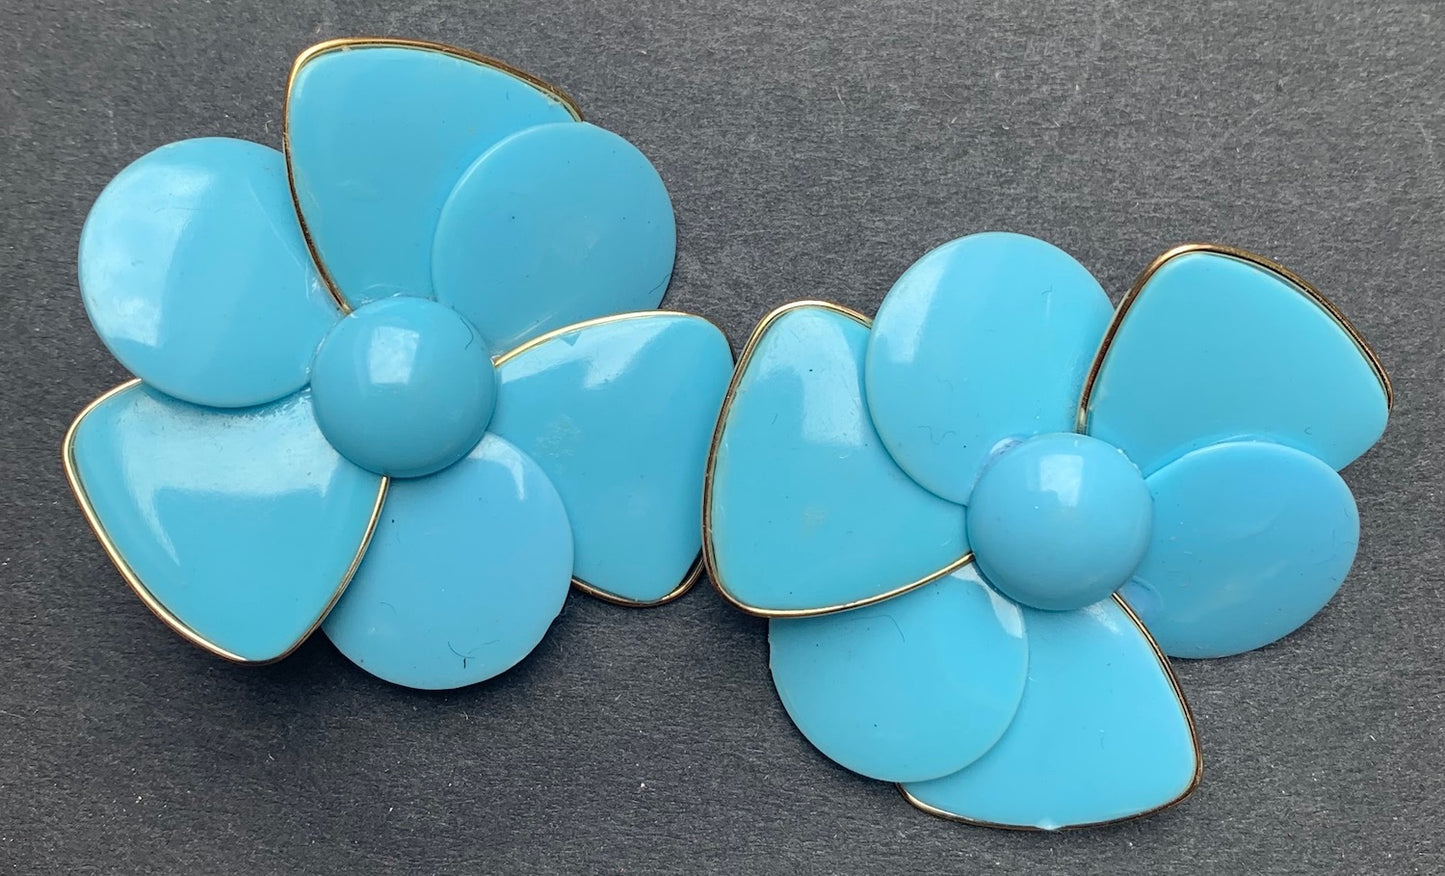 1950s BIG Statement Clip-On Earrings !